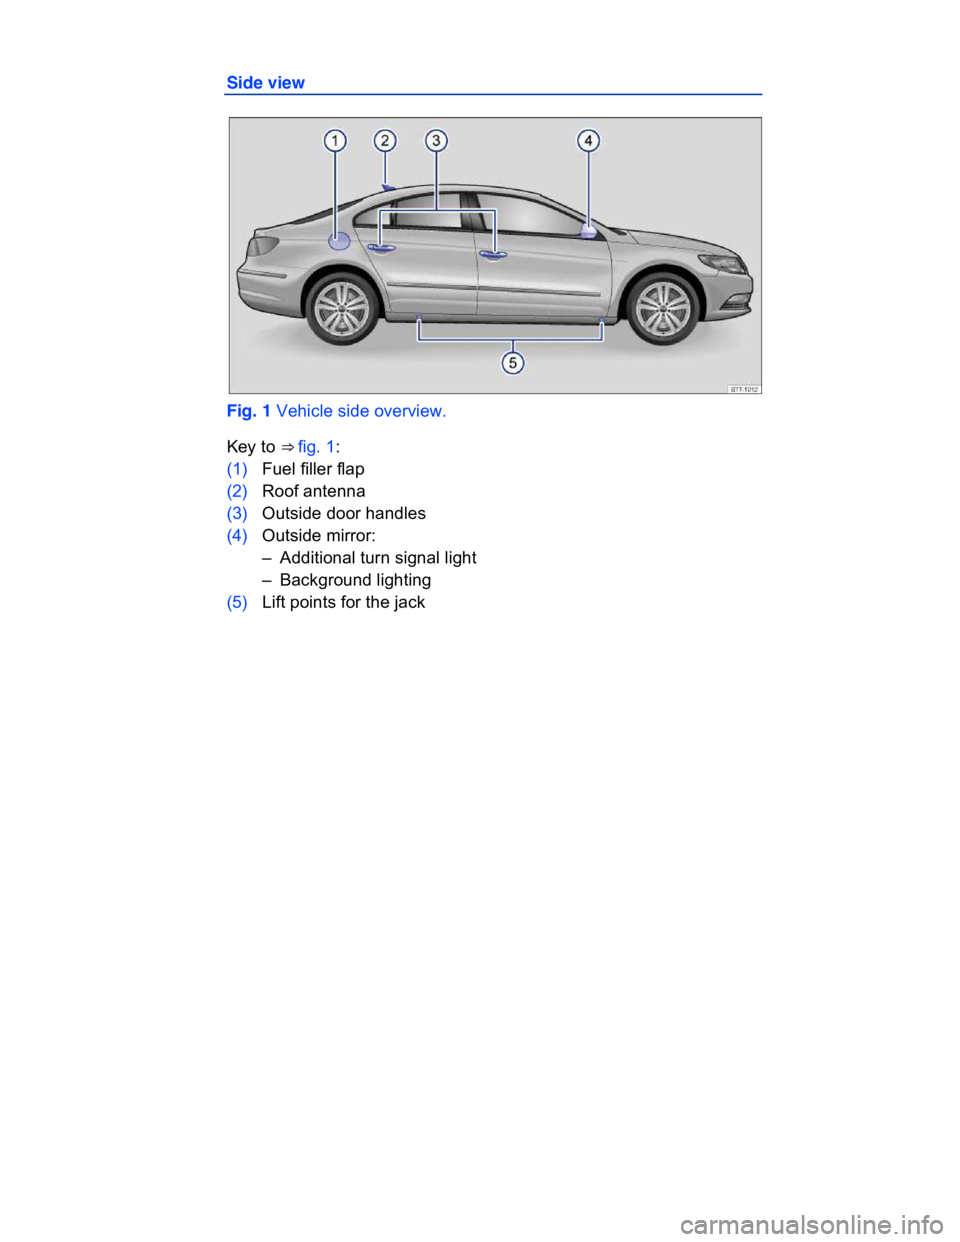 VOLKSWAGEN CC 2009  Owners Manual  
Side view 
 
Fig. 1 Vehicle side overview. 
Key to ⇒ fig. 1: 
(1) Fuel filler flap  
(2) Roof antenna  
(3) Outside door handles  
(4) Outside mirror:  
–  Additional turn signal light  
–  